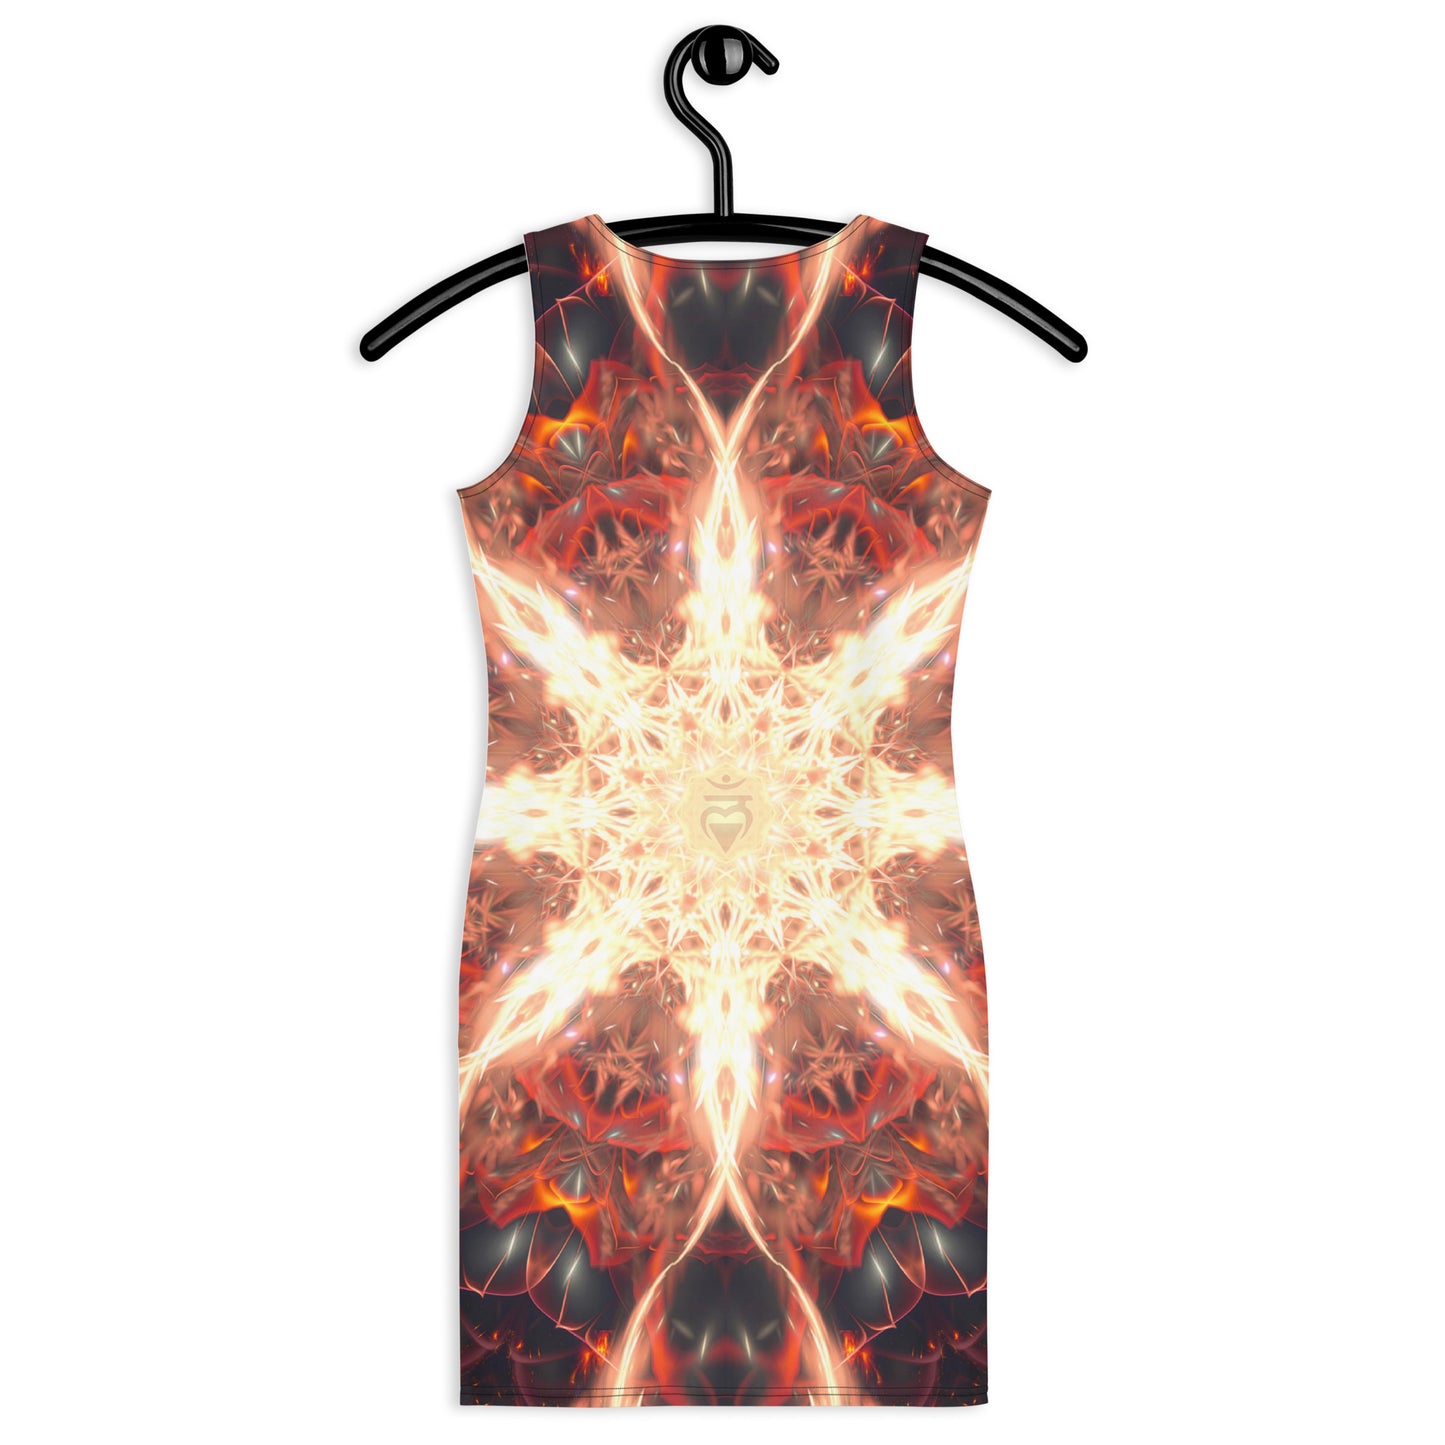 "Muladhara" Bodycon FITTED DRESS